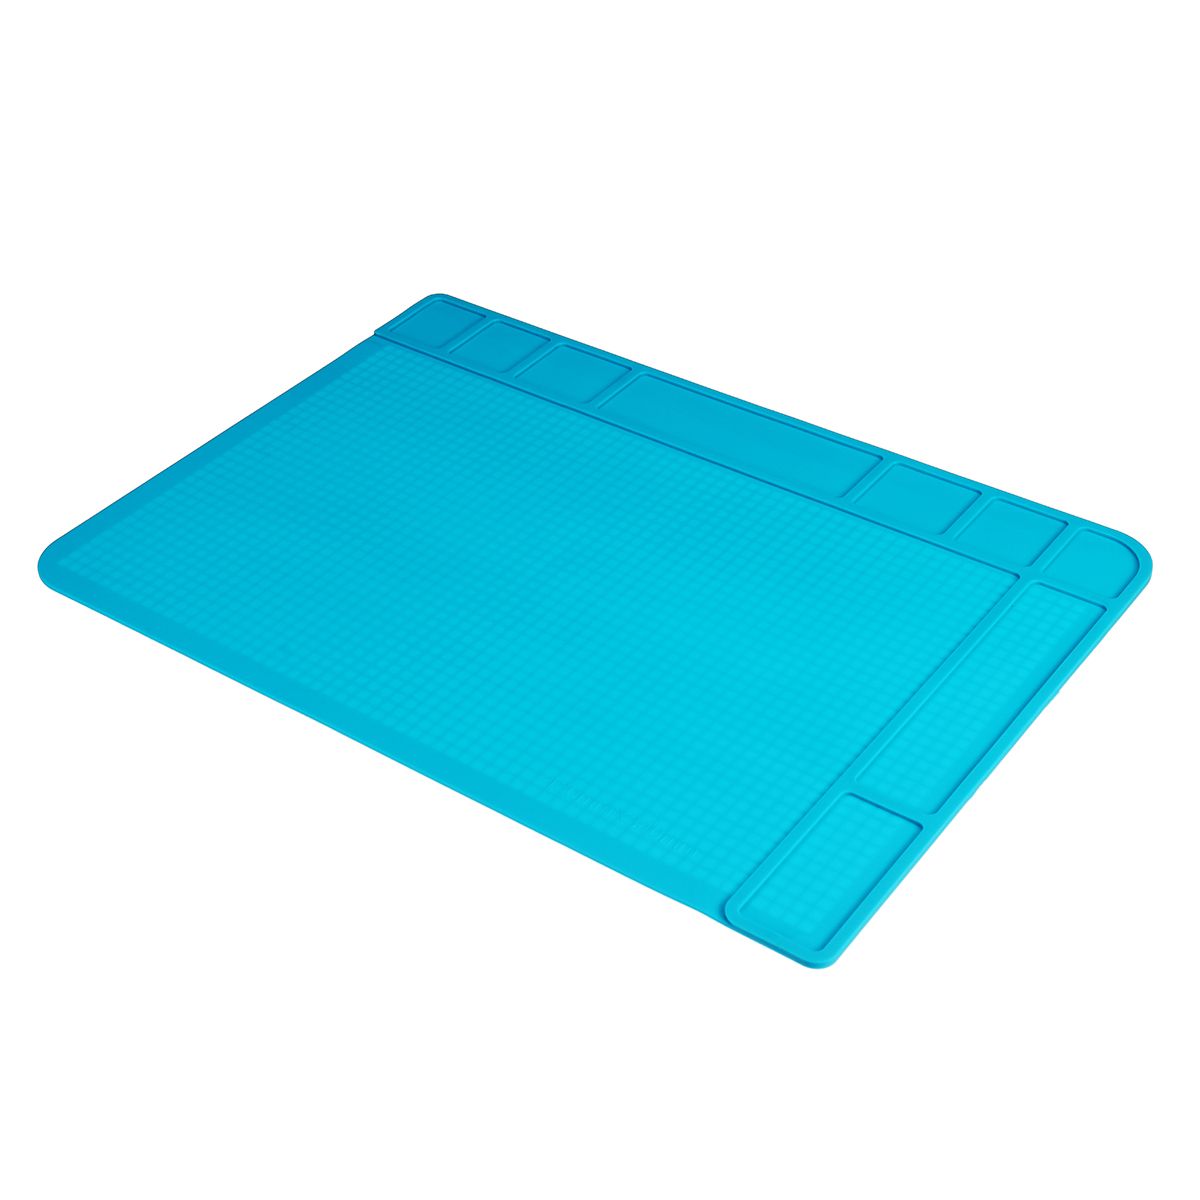 Phone-Repairing-Silicone-Pad-Thermostability-Heat-Insulation-Silica-Gel-Pad-Antistatic-Anticorrosion-1589605